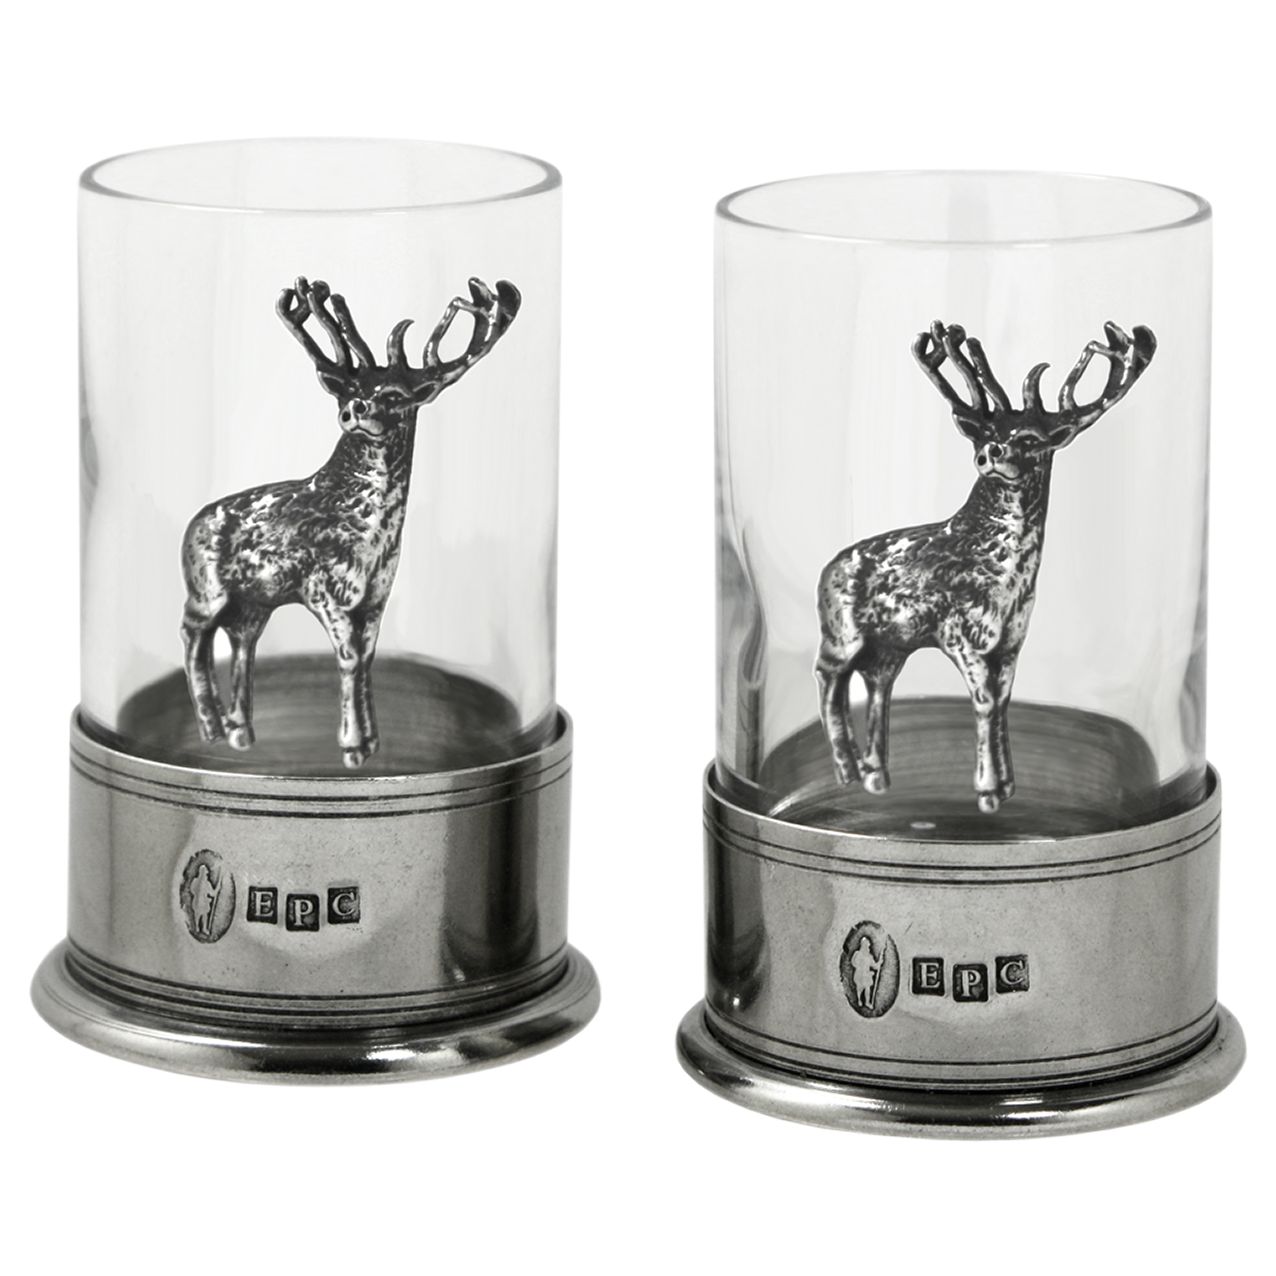 RRP £20 Stag Shot Glass by The English Pewter Company 